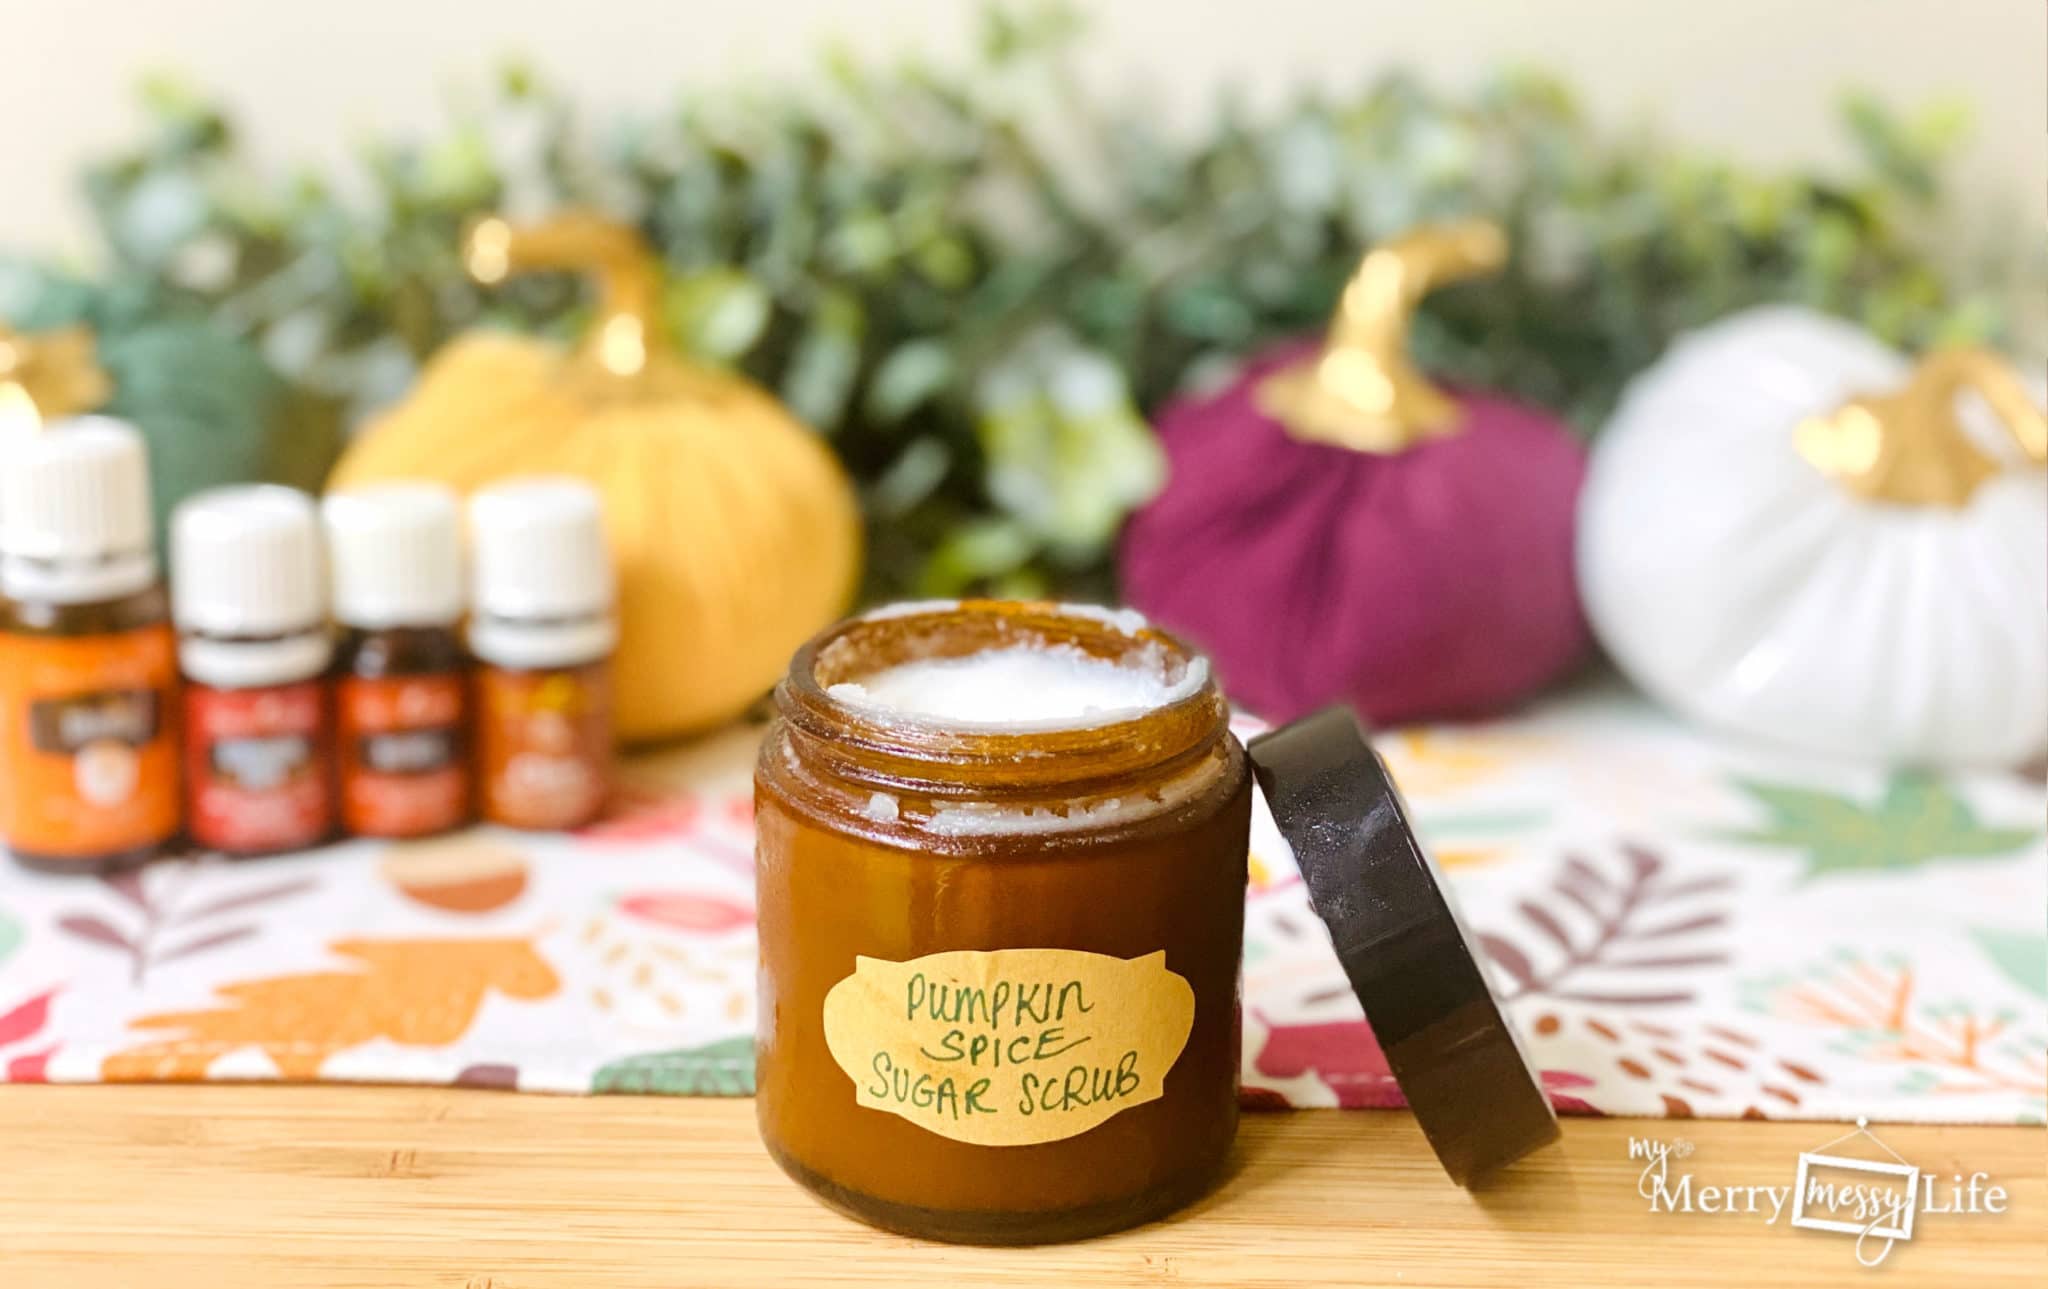 Natural Pumpkin Spice Sugar Scrub Recipe - bring your favorite fall scents into your beauty products! This luxurious recipe softens and exfoliates the skin and smells yummy!